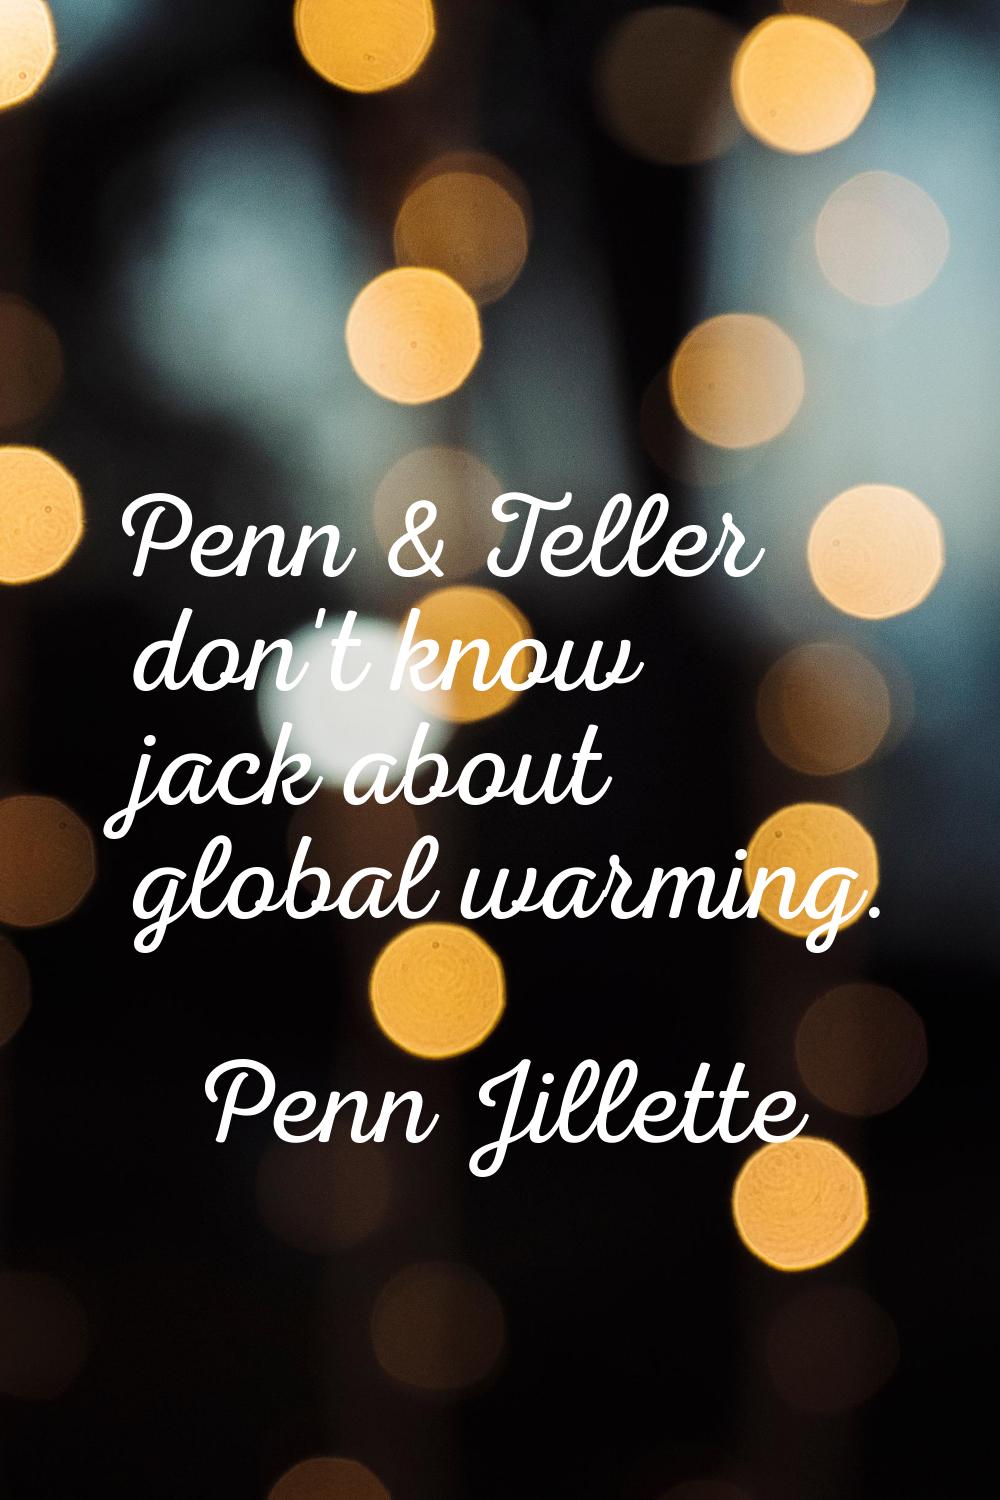 Penn & Teller don't know jack about global warming.